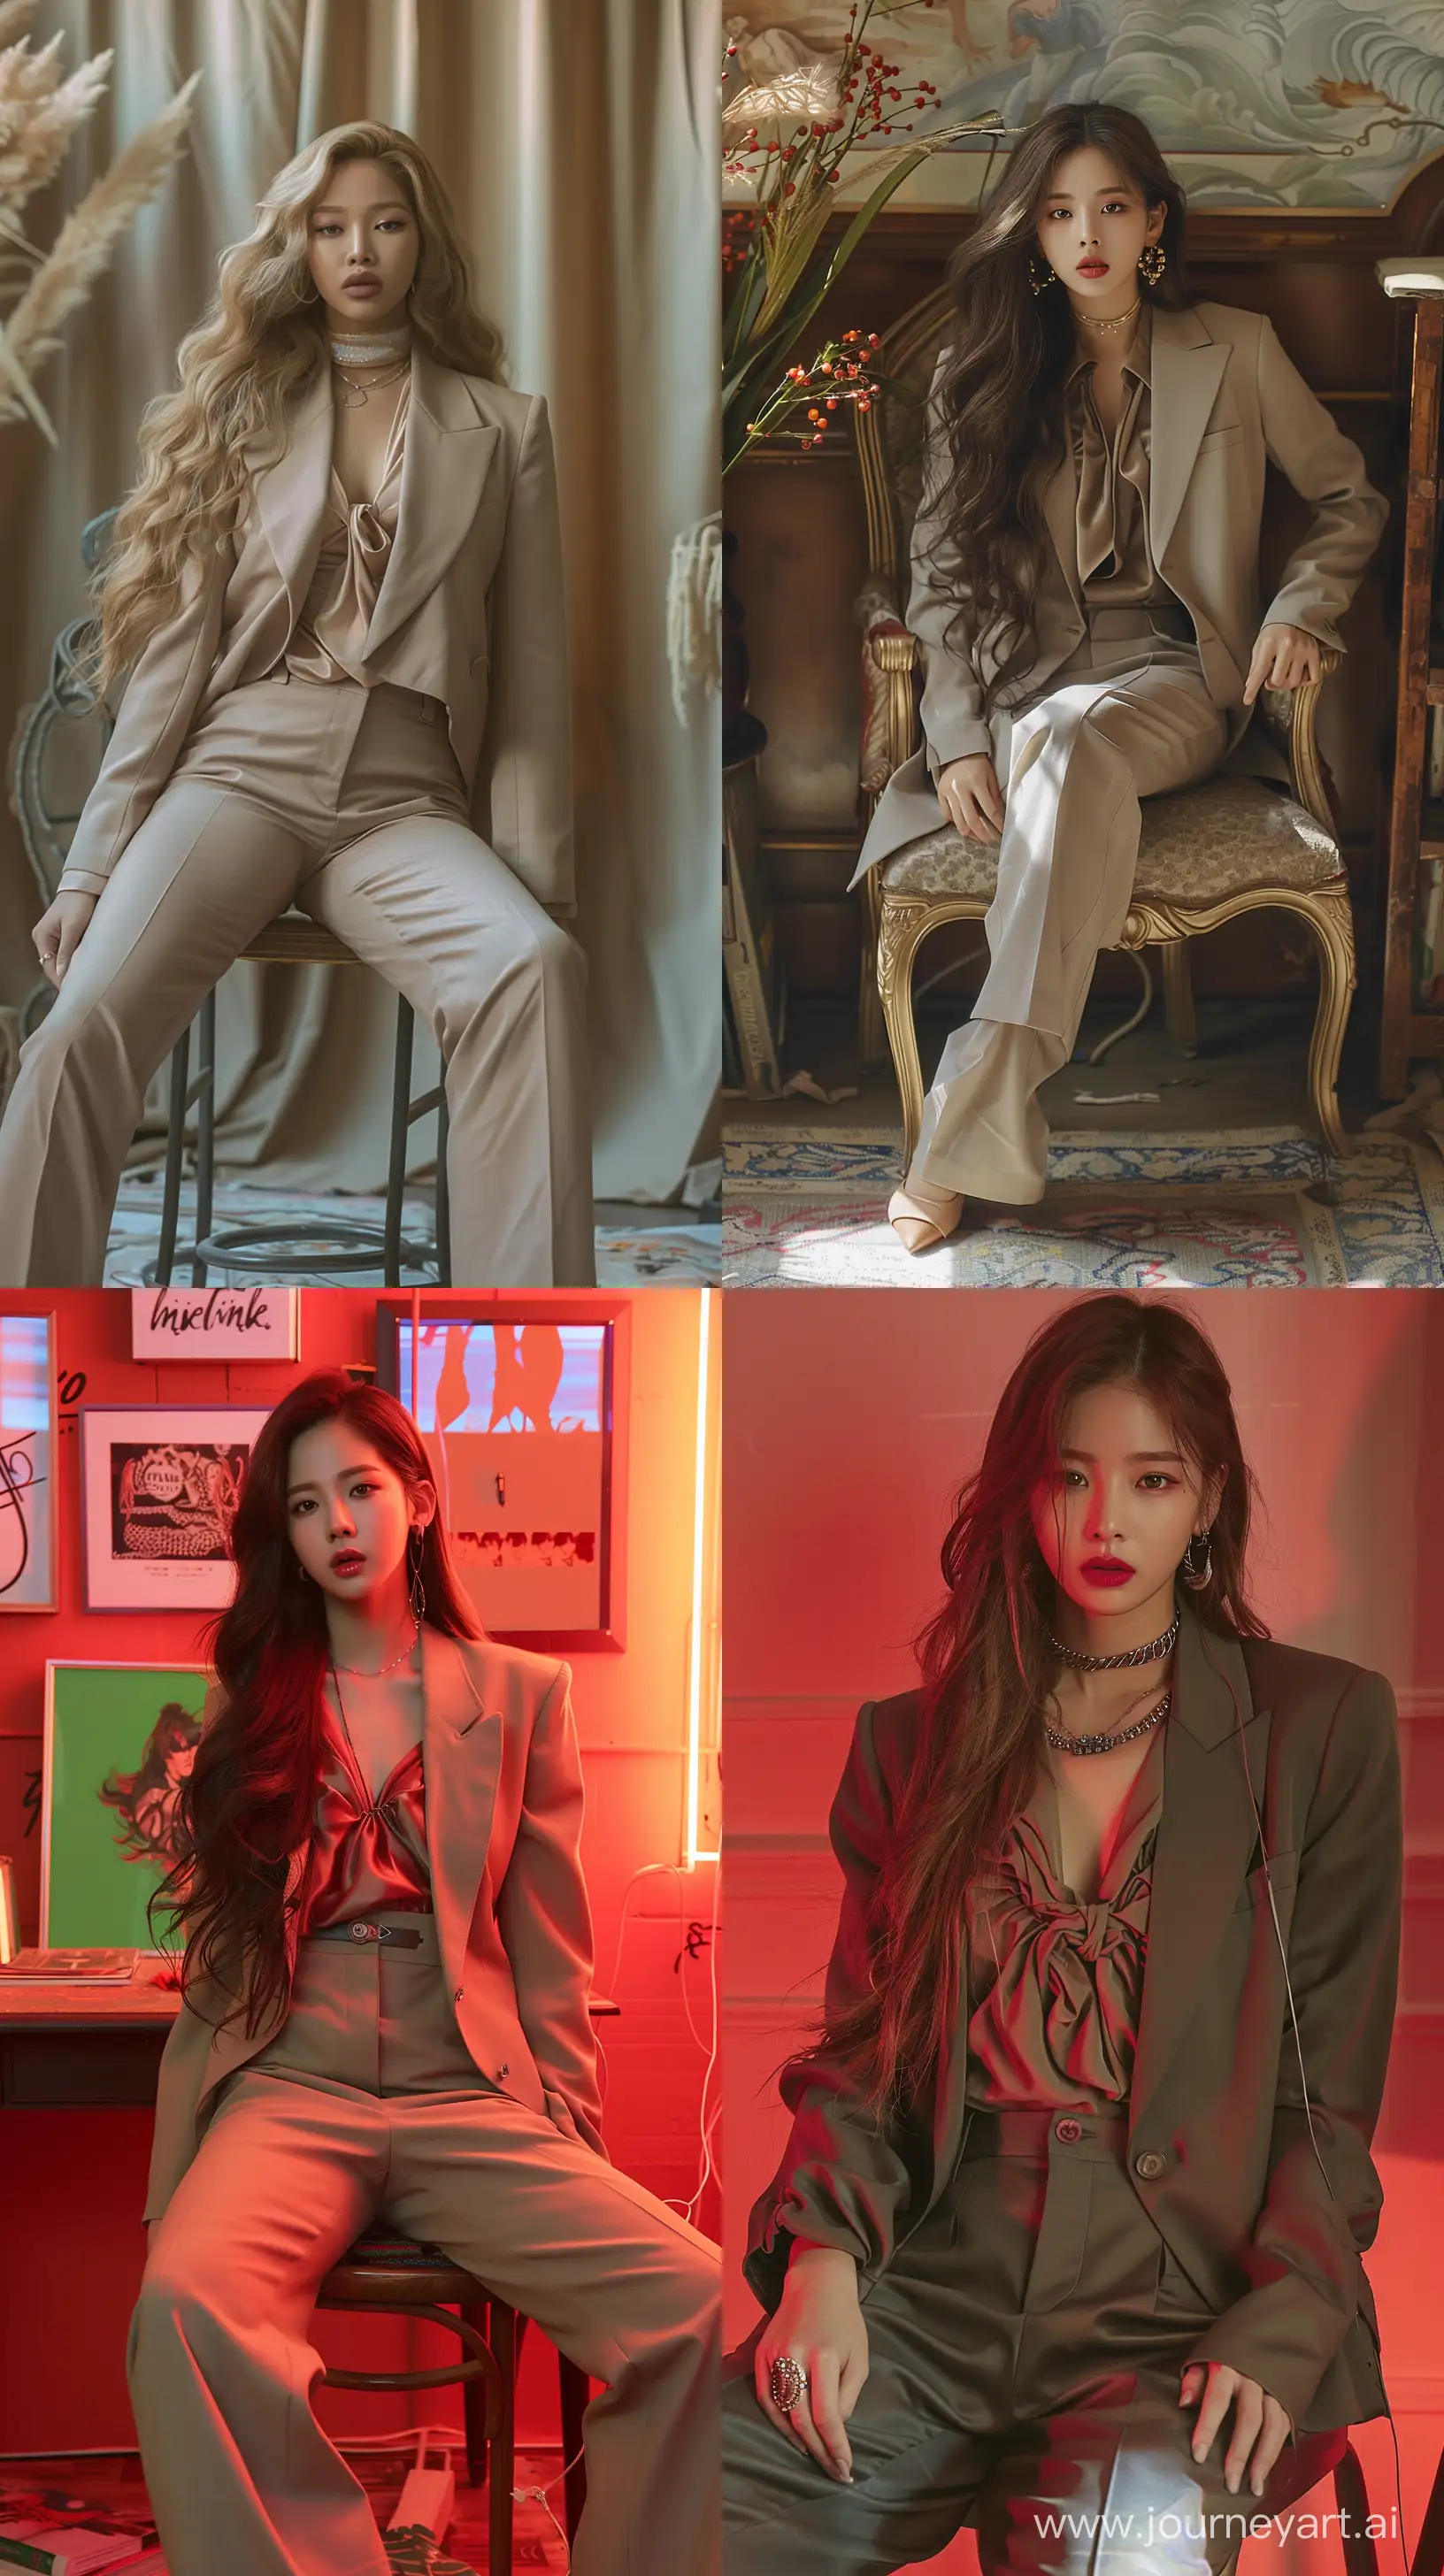 High resolution fashion photo of jennie blackpink's full body shot, wearing a suit pants and simple blouse,sit on chair, super casual, everyday attire, in the style of jennie, mysterious nocturnal scenes, mischievous motif, album covers, flickr --ar 9:16 --style raw --stylize 250 --v 6